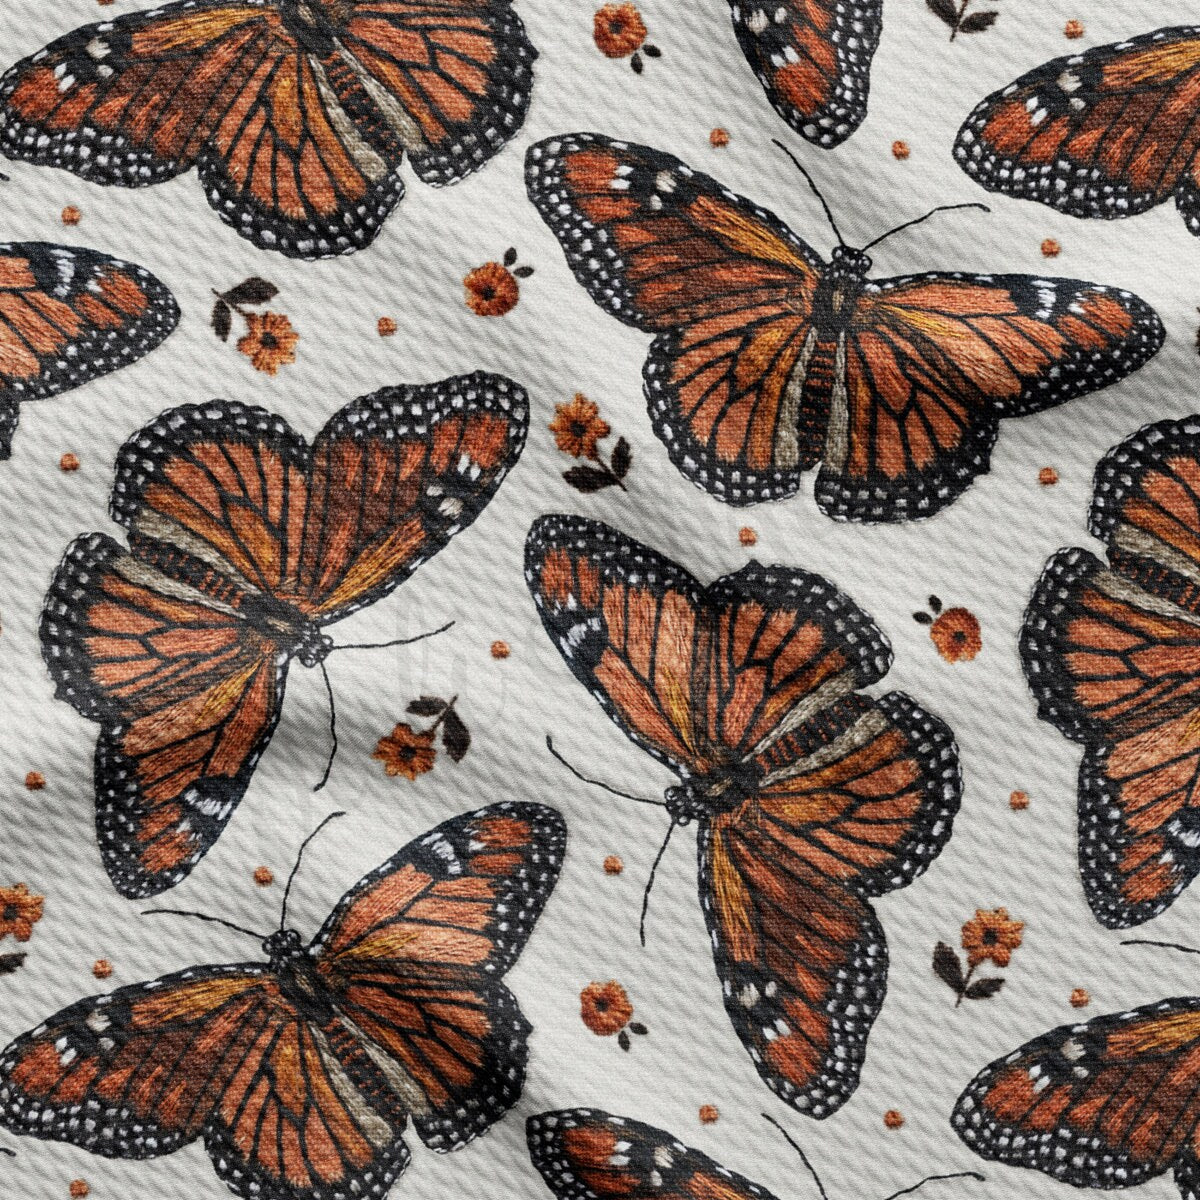 Butterfly Embroidery  Bullet Textured Fabric by the yard Fabric AA1978